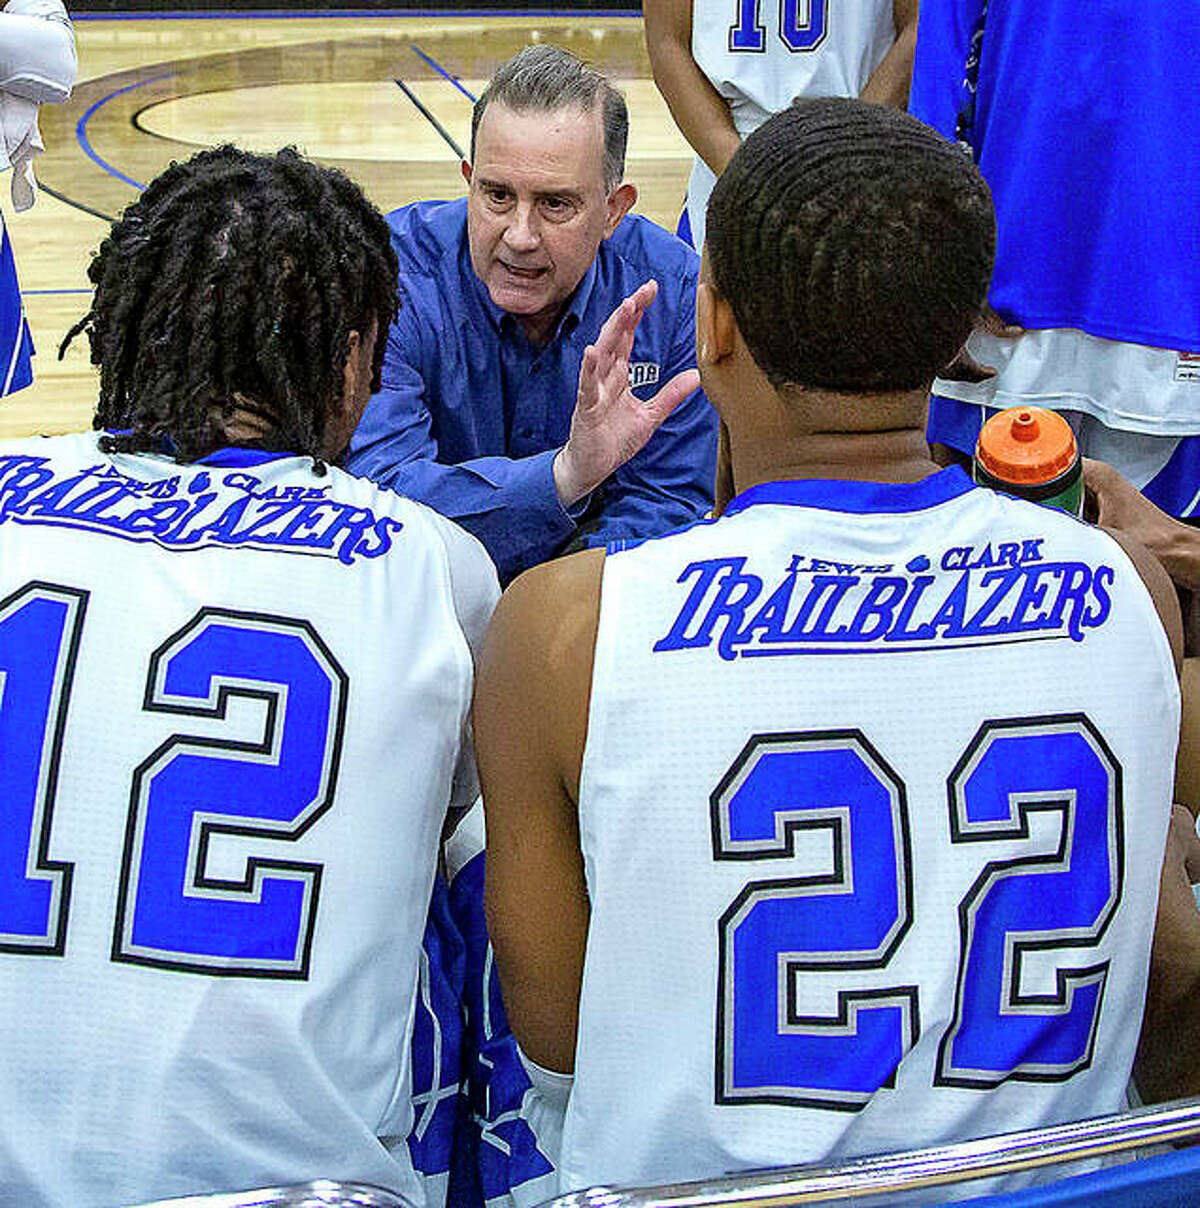 Lewis and Clark Community College men’s basketball coach Doug Stotler talks to his team during a timeout last season. The Trailblazers will face Moberly Area College Friday at home and State Fair College Saturday in Sedalia, Mo.